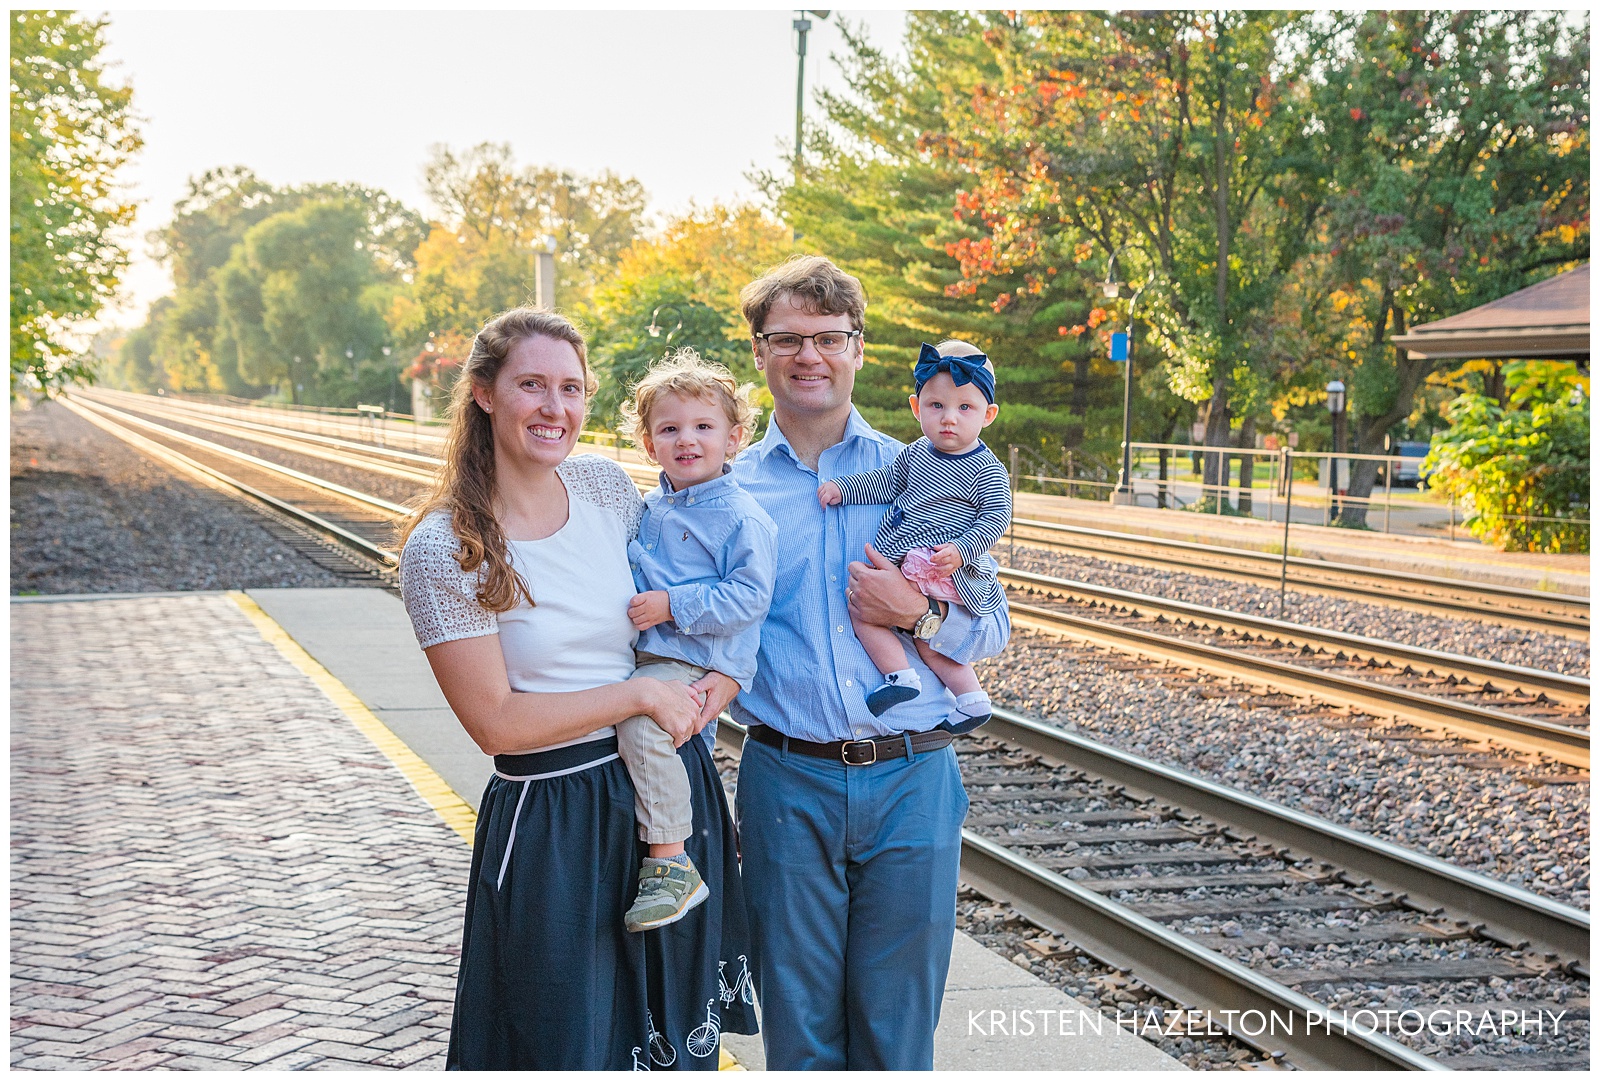 Family portrait of four at a train station